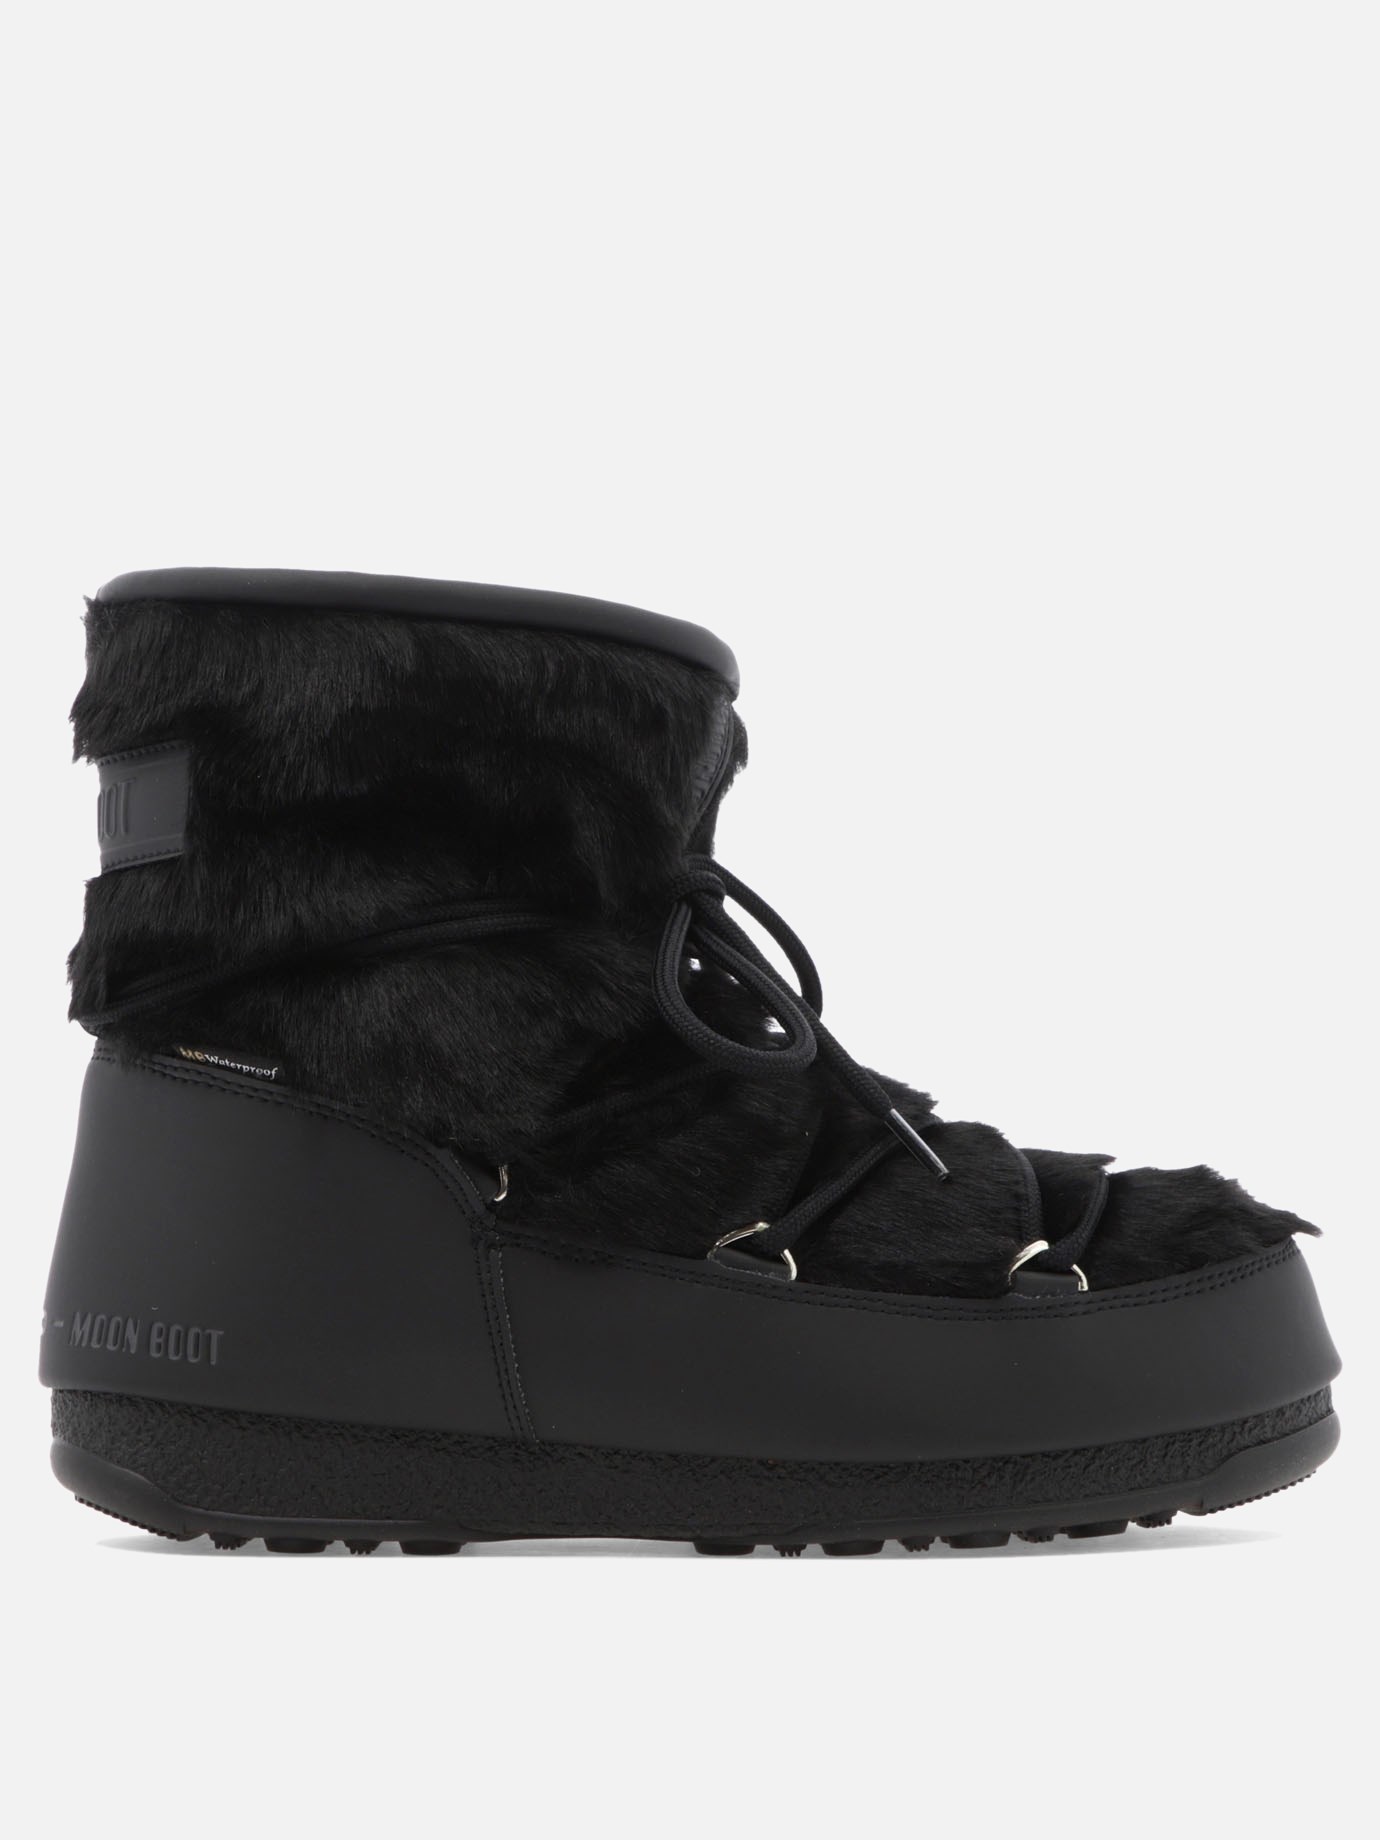  Monaco  after-ski bootsby Moon Boot - 4